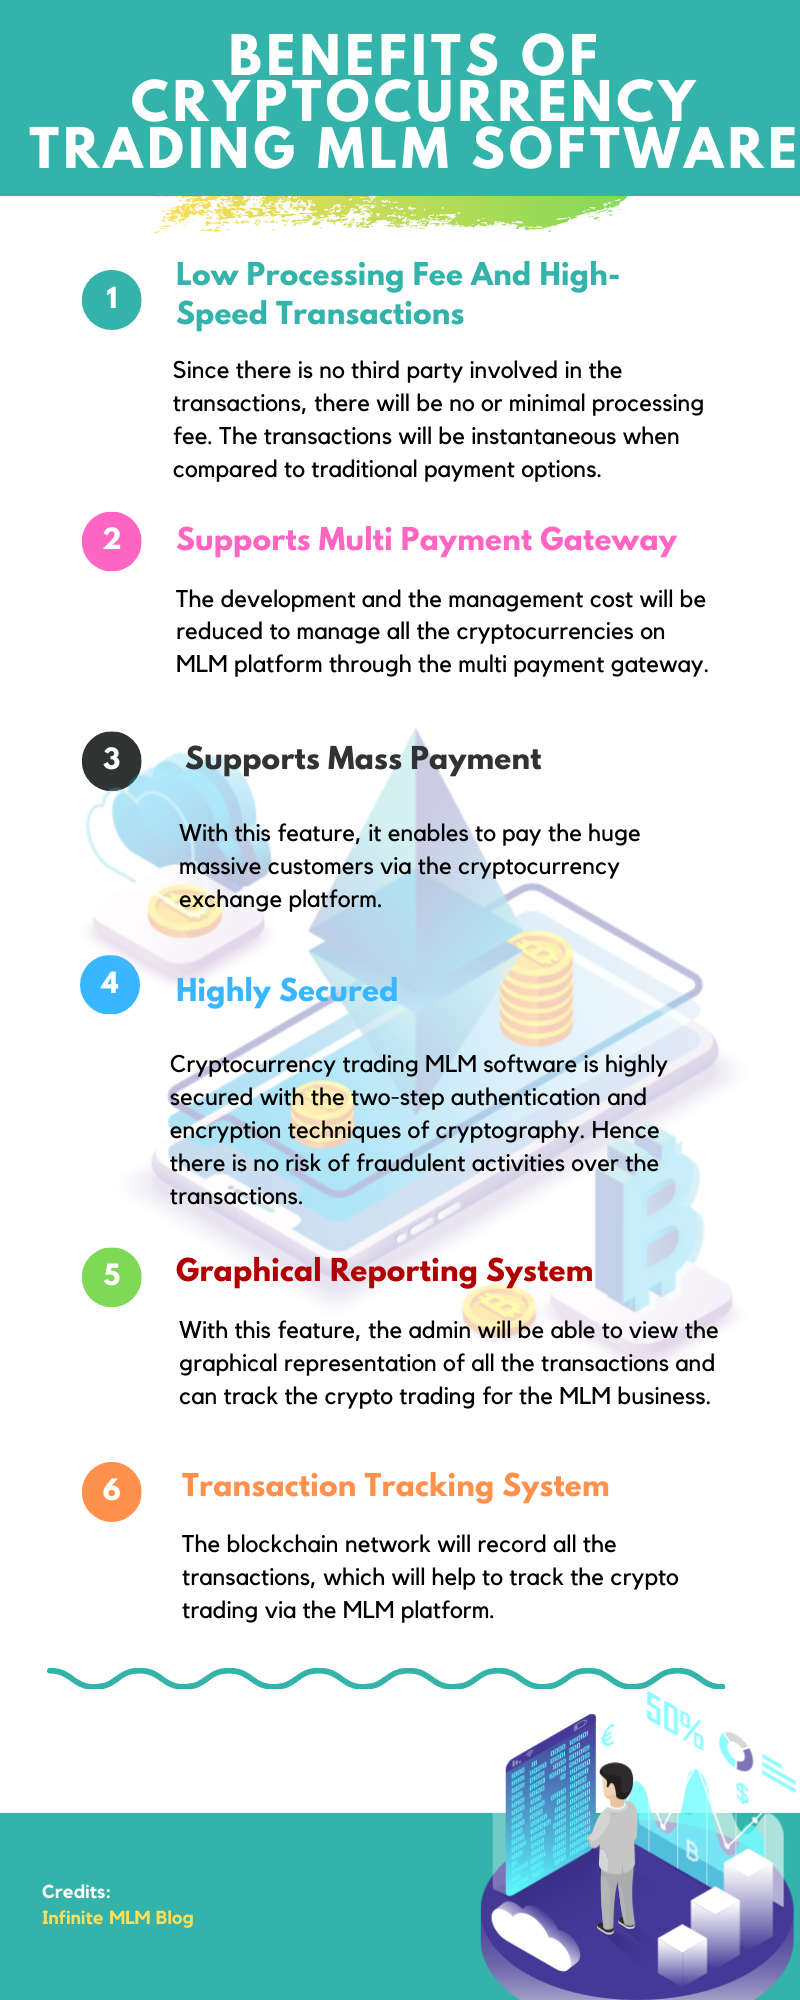 Cryptocurrency Trading MLM Software Benefits